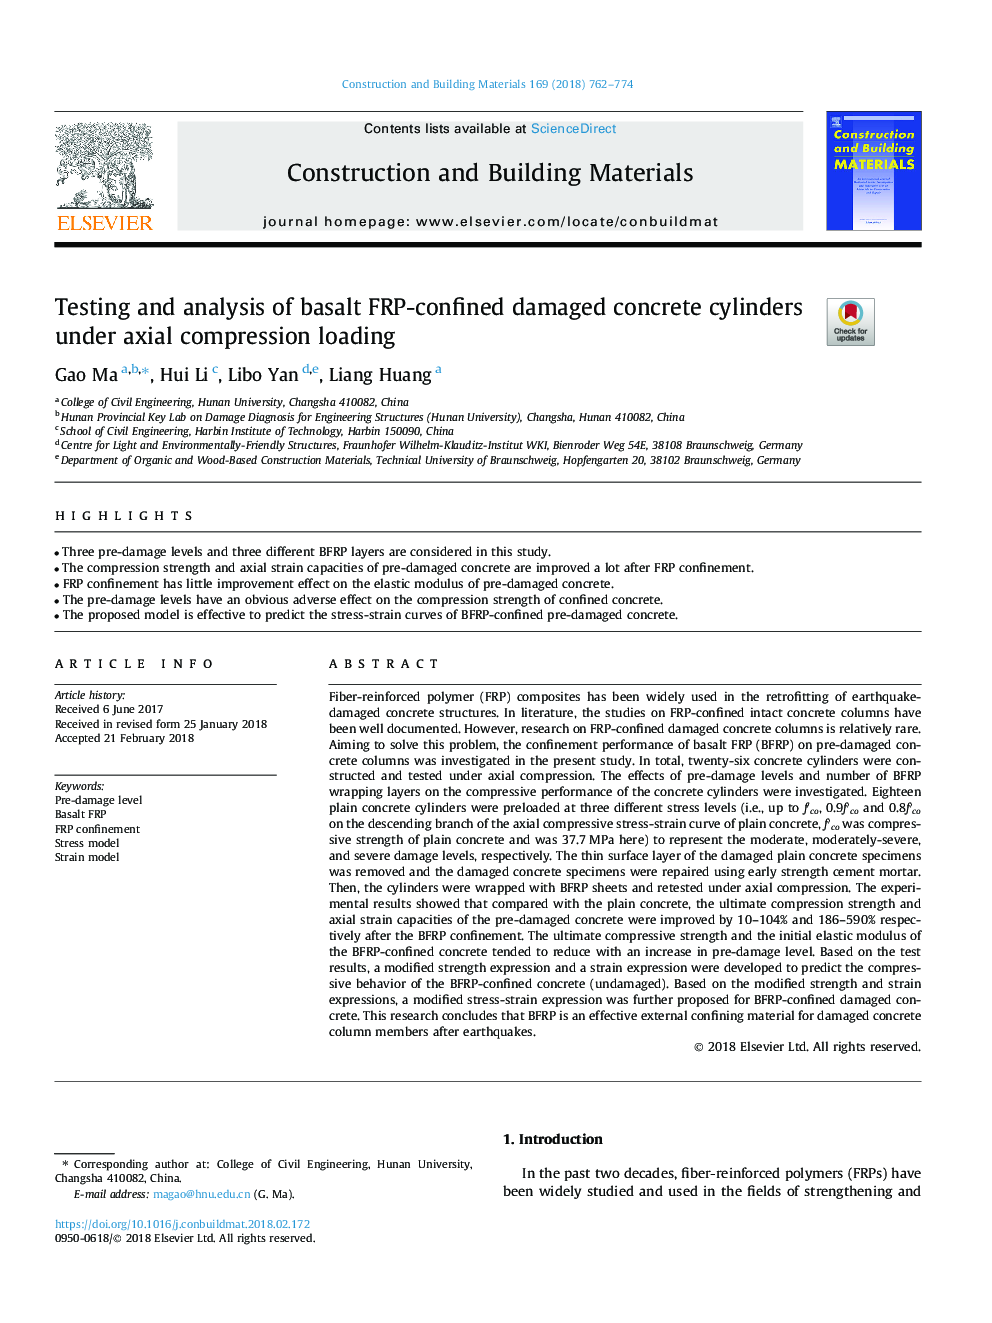 Testing and analysis of basalt FRP-confined damaged concrete cylinders under axial compression loading